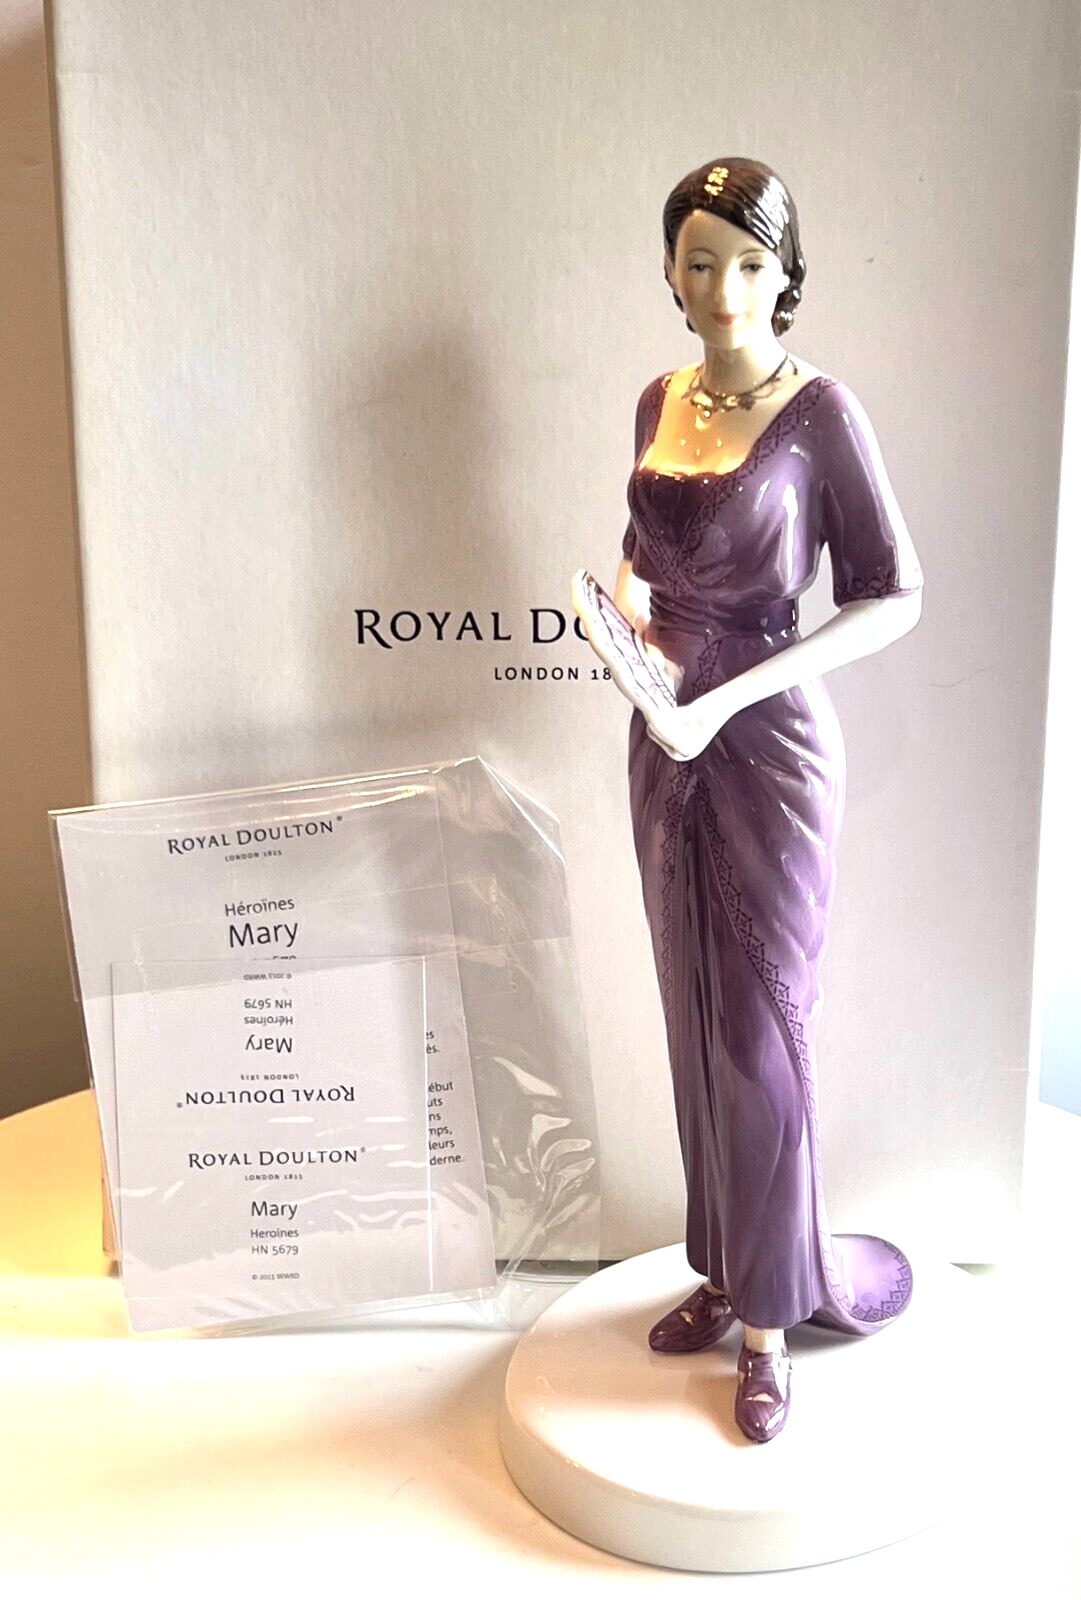 Royal Doulton Pretty Ladies Heroines Mary Figurine HN5679 Limited Edition NEW